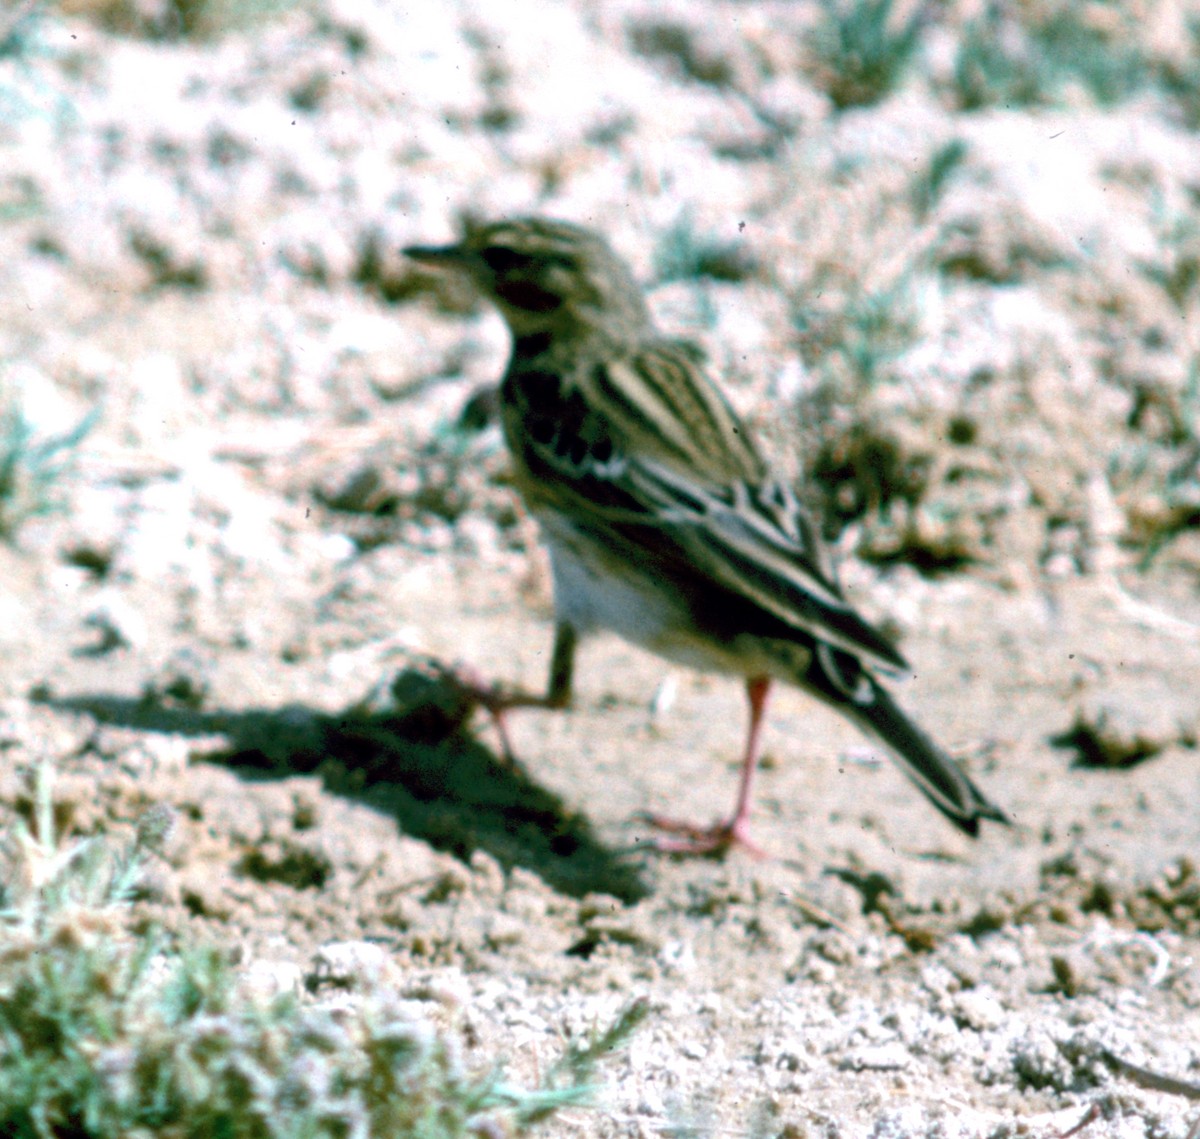 Tree Pipit - Cliff Peterson